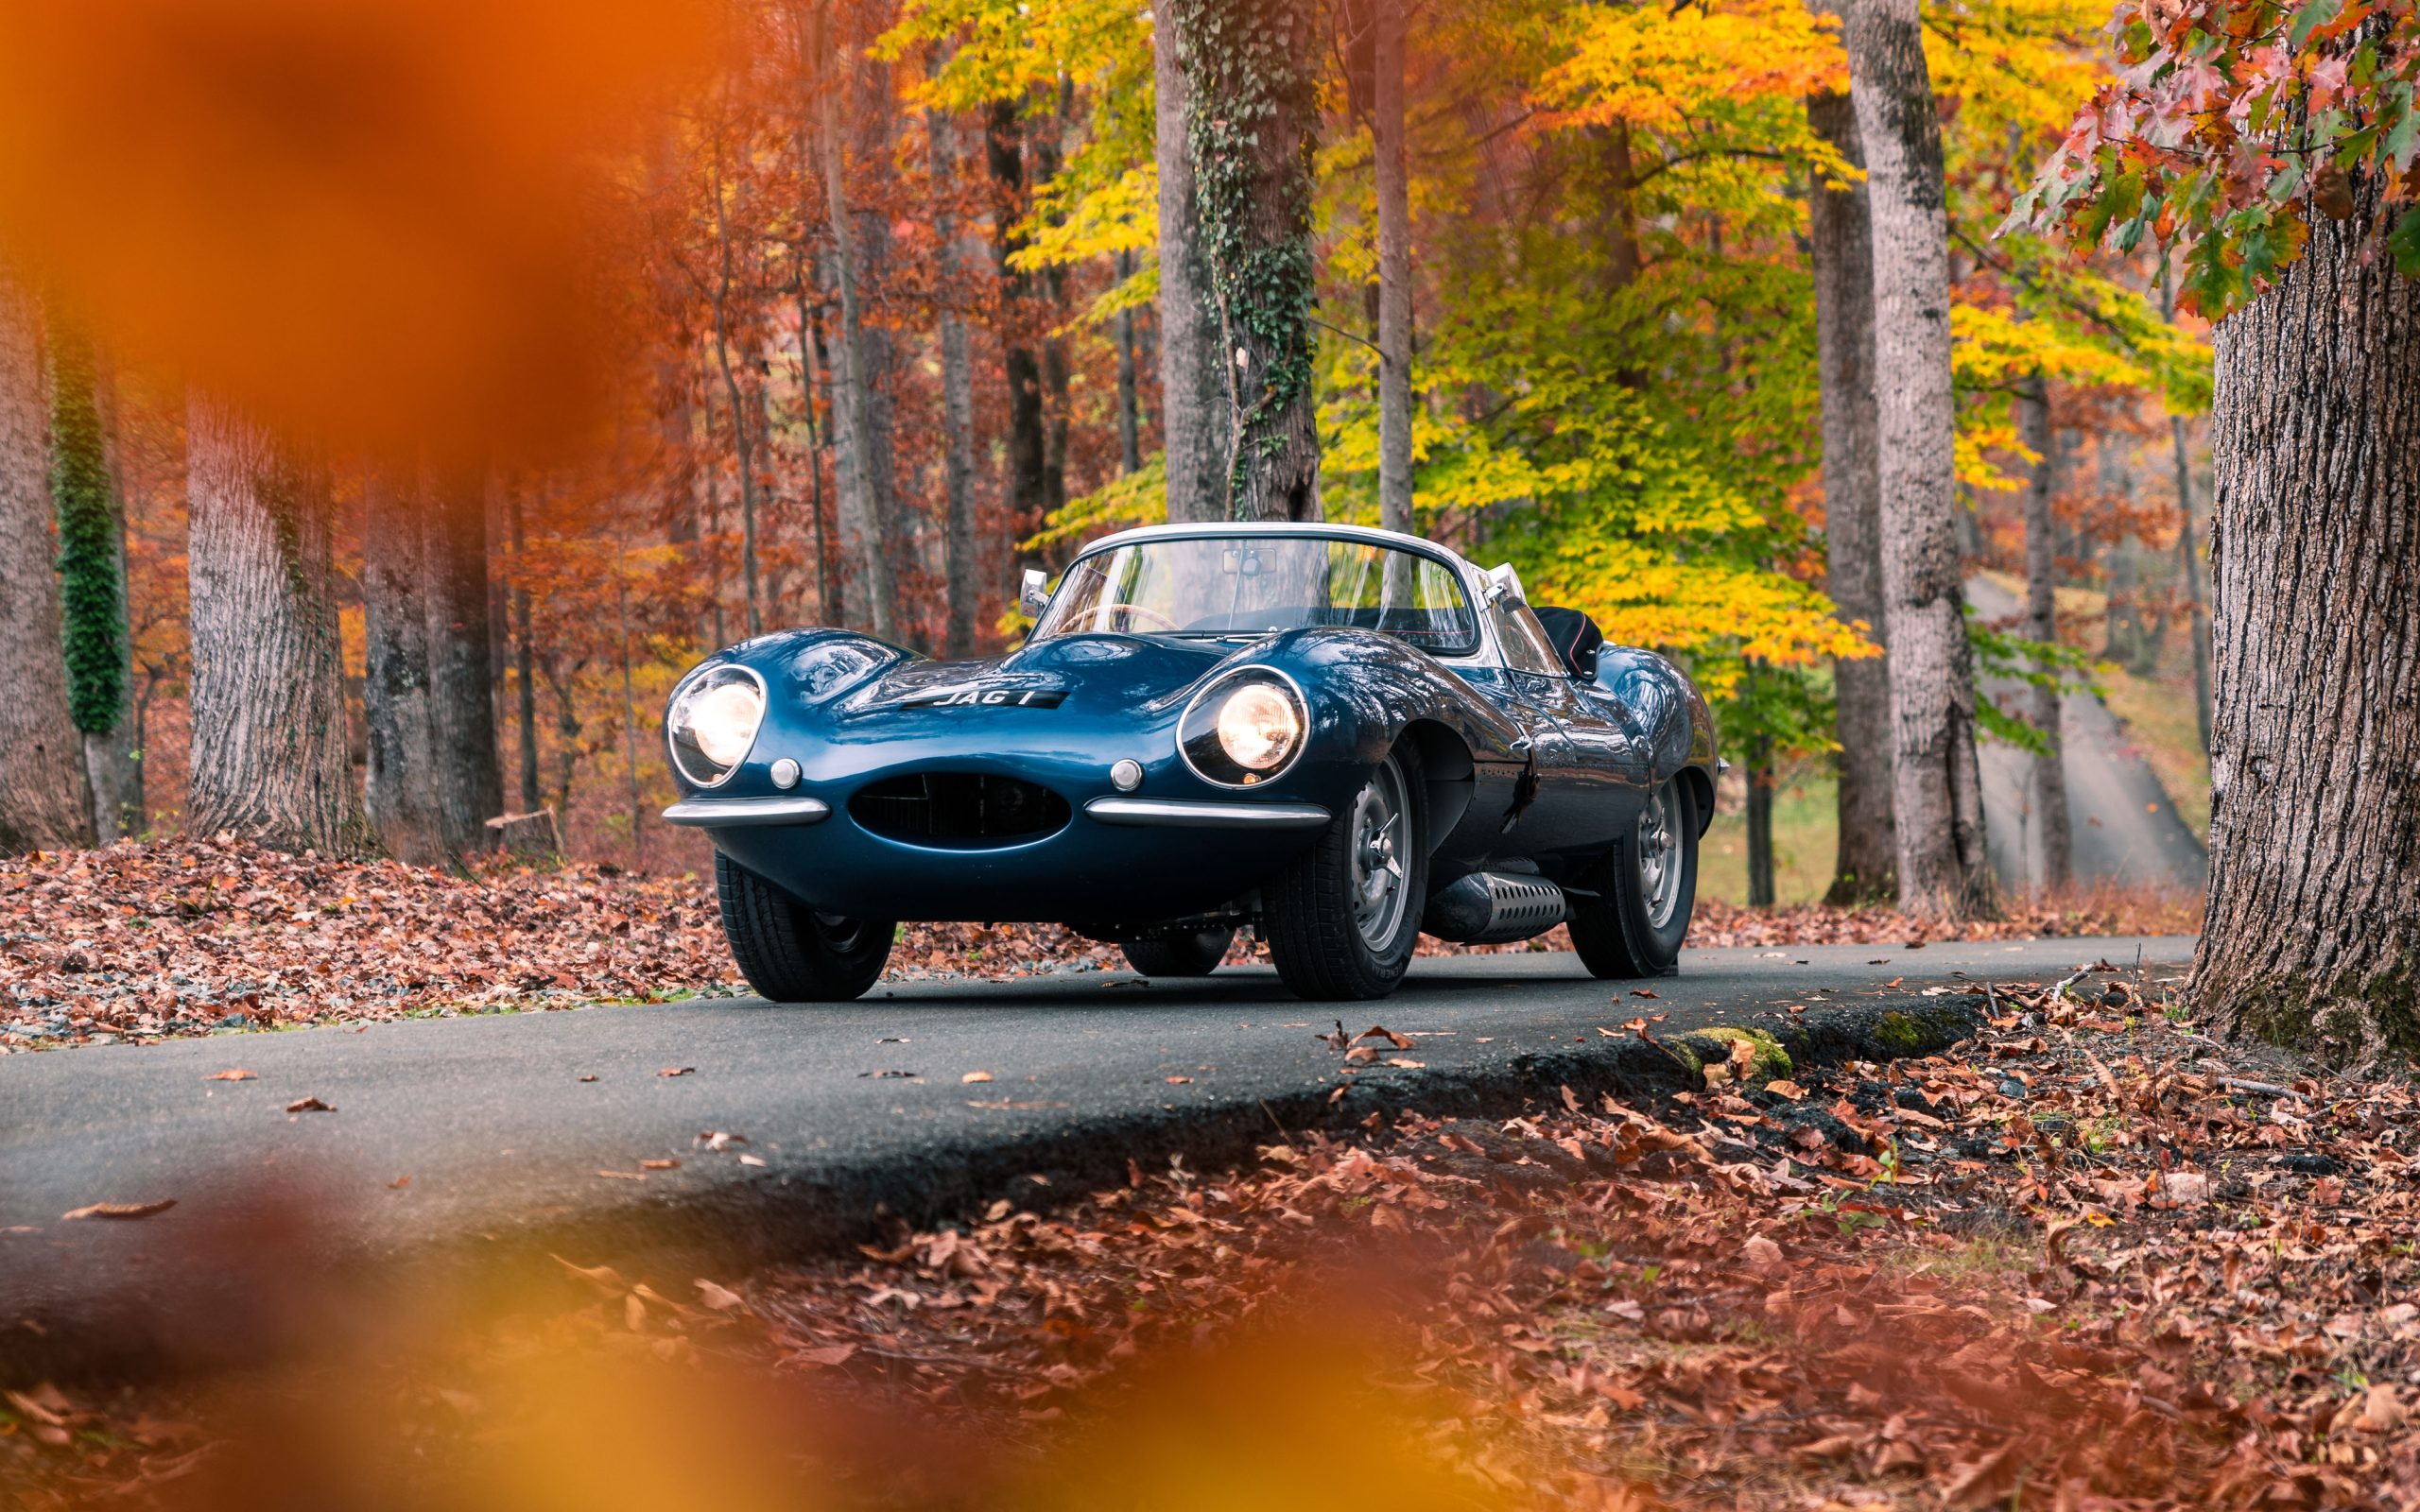 An extraordinary Jaguar XKSS is about to hit the block